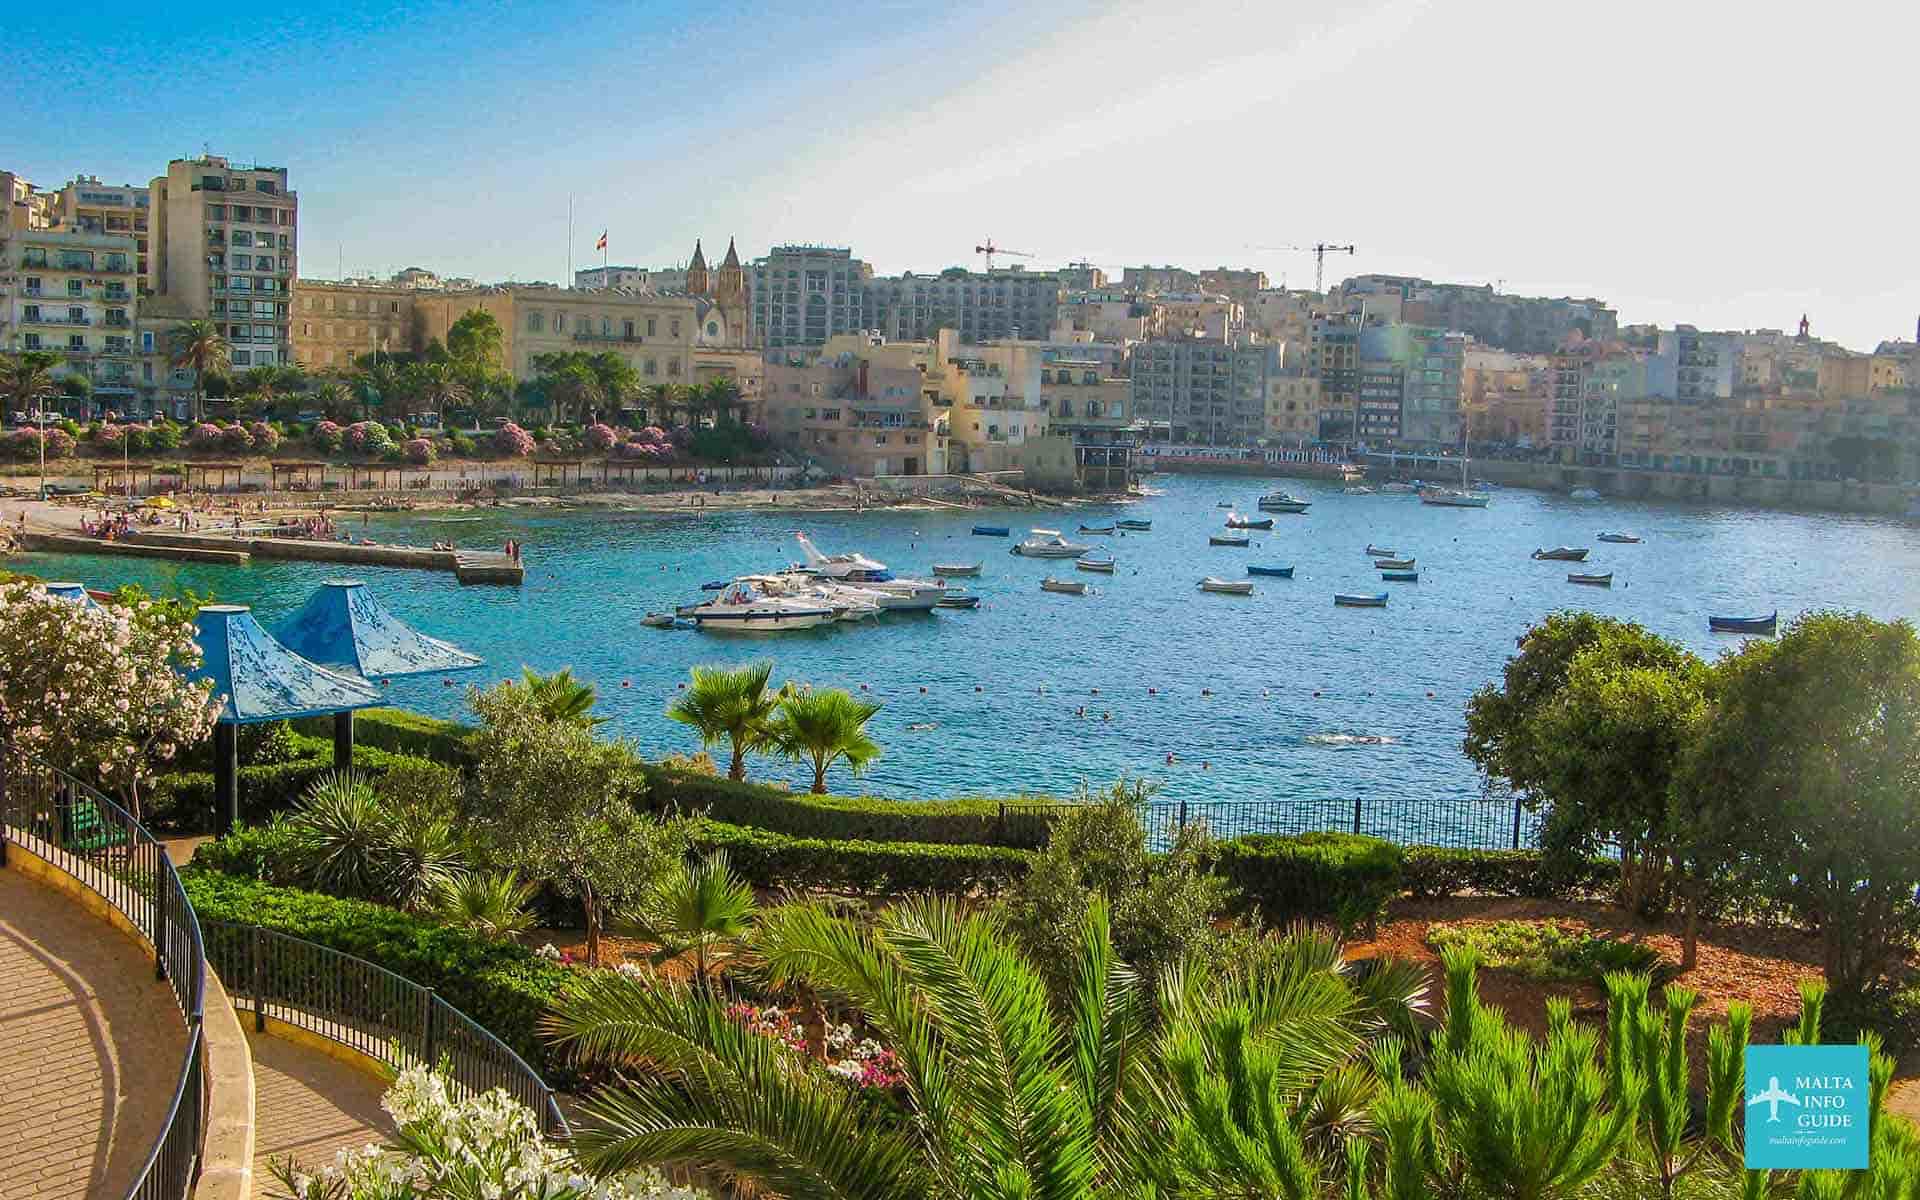 A view of Balluta from Sliema.